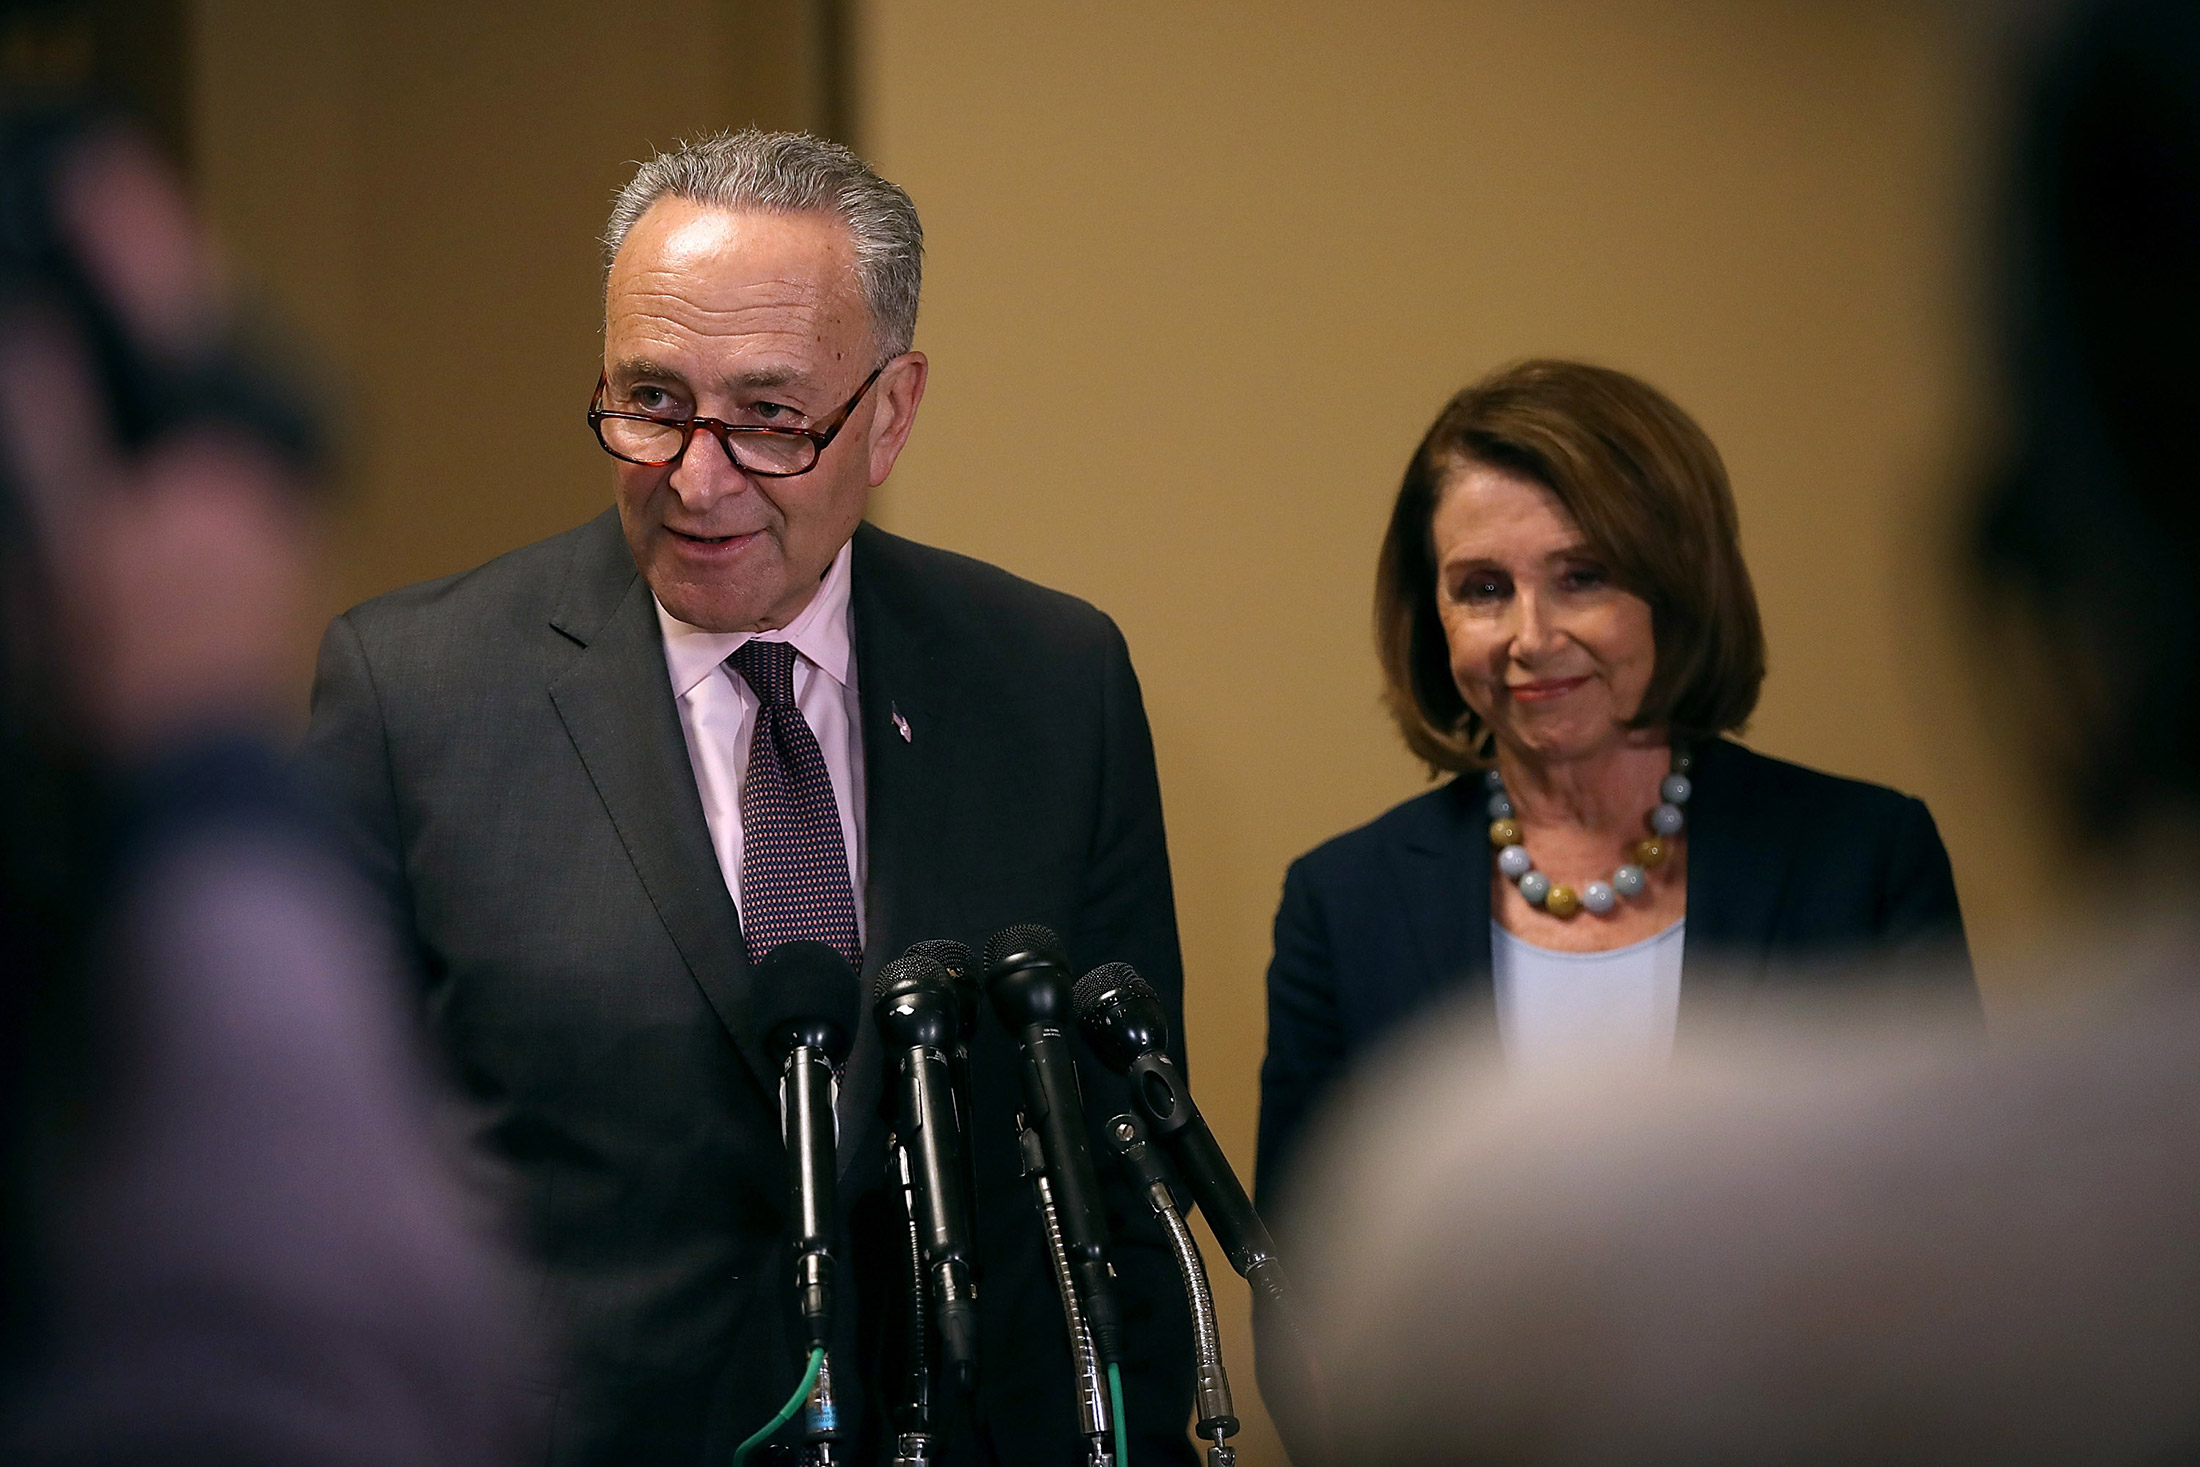 Senate Minority Leader Charles Schumer speaks as House Minority Leader Nancy Pelosi looks on during a news conference at the U.S. Capitol.